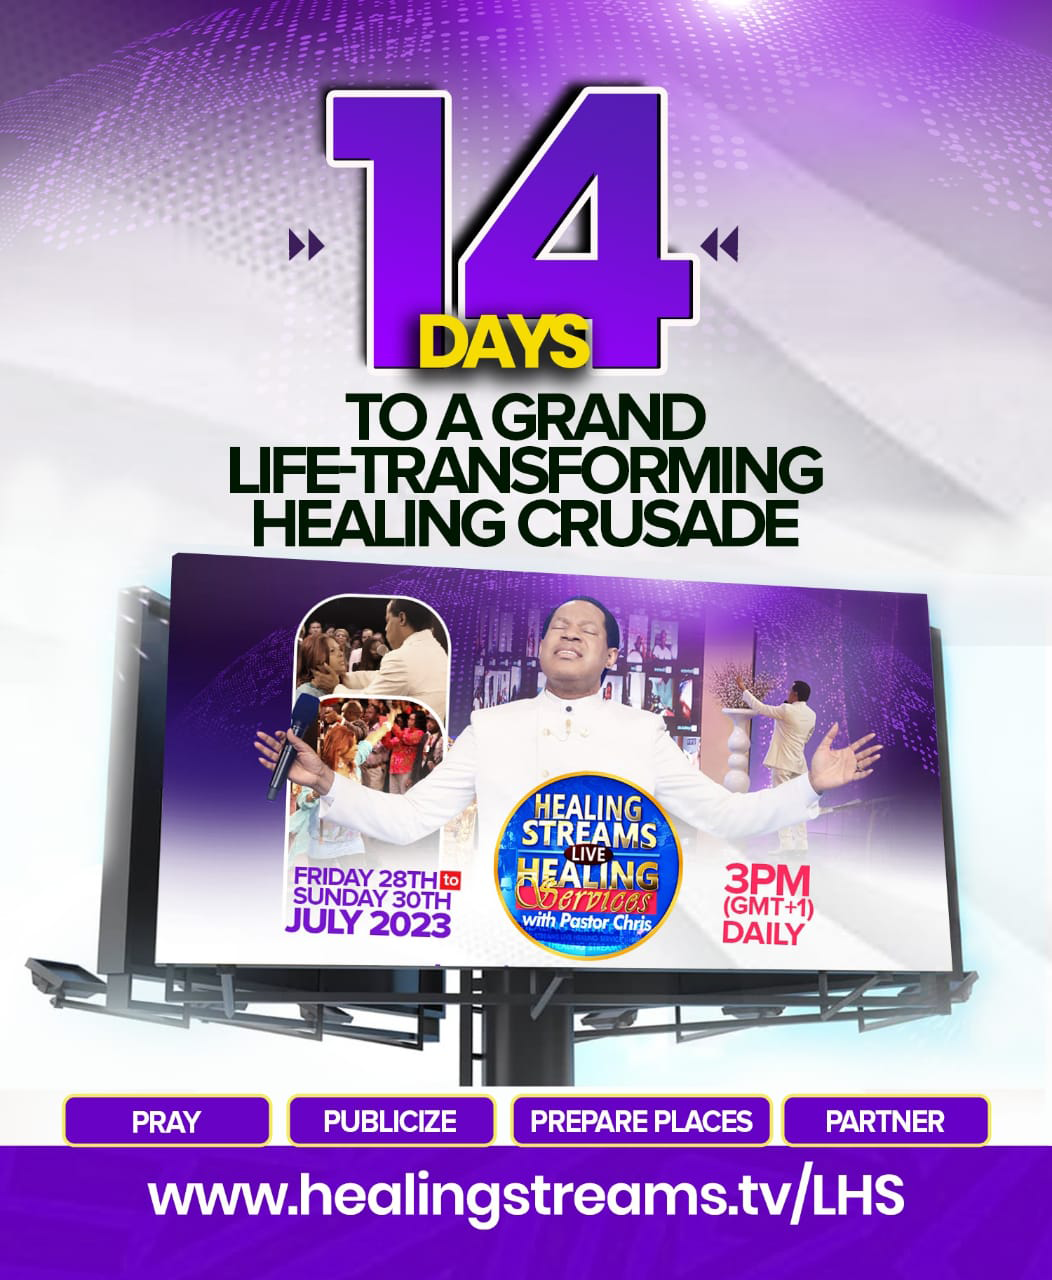 IT'S 14 DAYS TO A GRAND LIFE-TRANSFORMING HEALING CRUSADE!